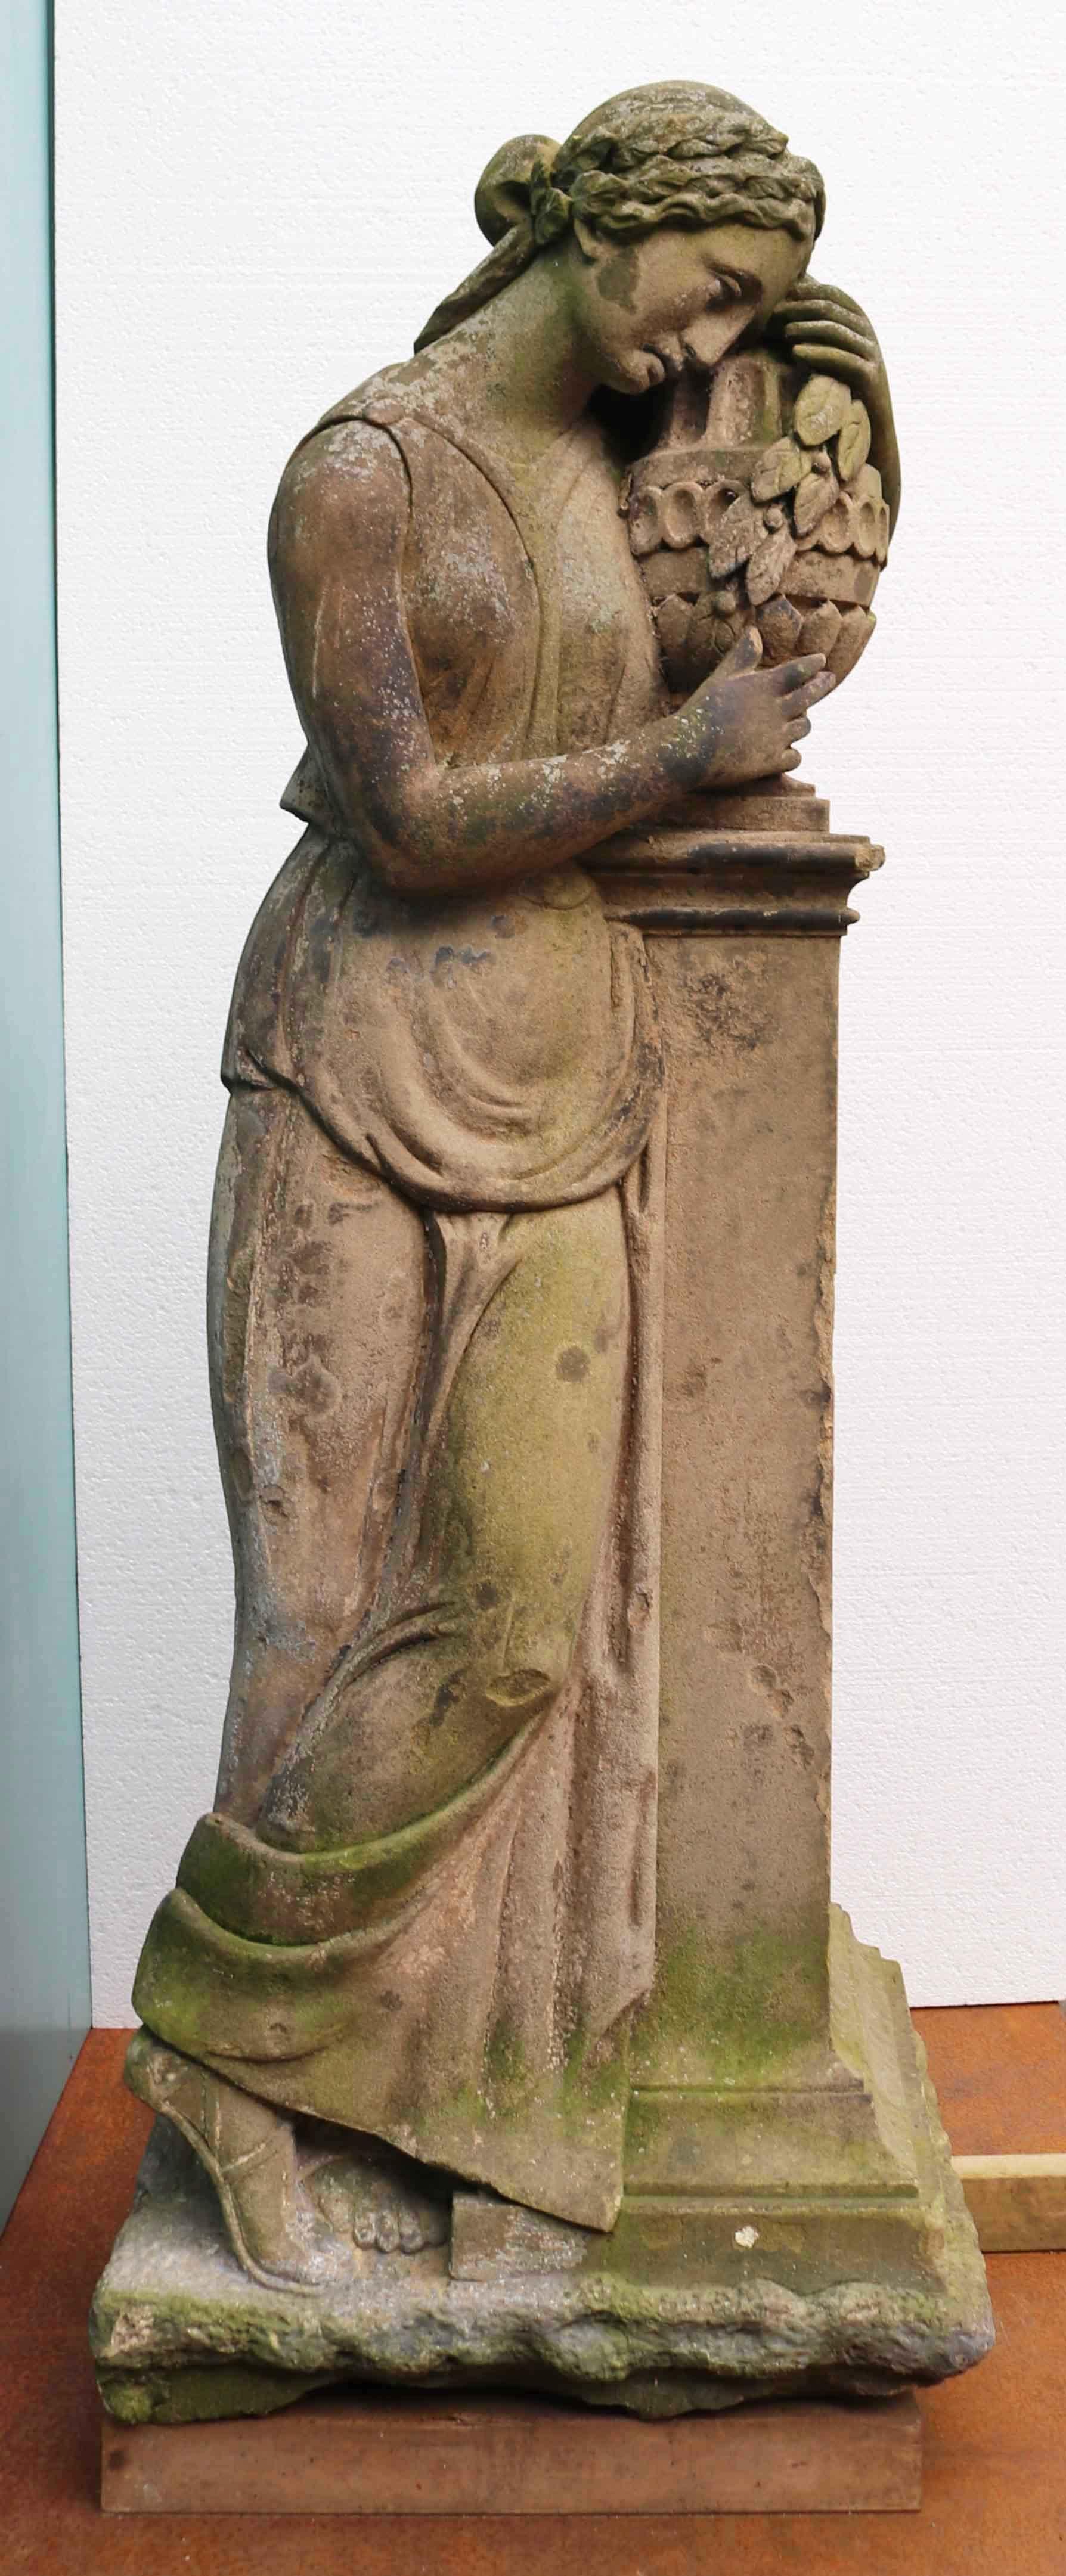 About

An impressive life-size hand carved natural stone statue of a woman in Classical Greek or Roman dress, grasping a vase.

Condition report

Good structural condition. No breaks or repairs. Weathered finish. Traces of old